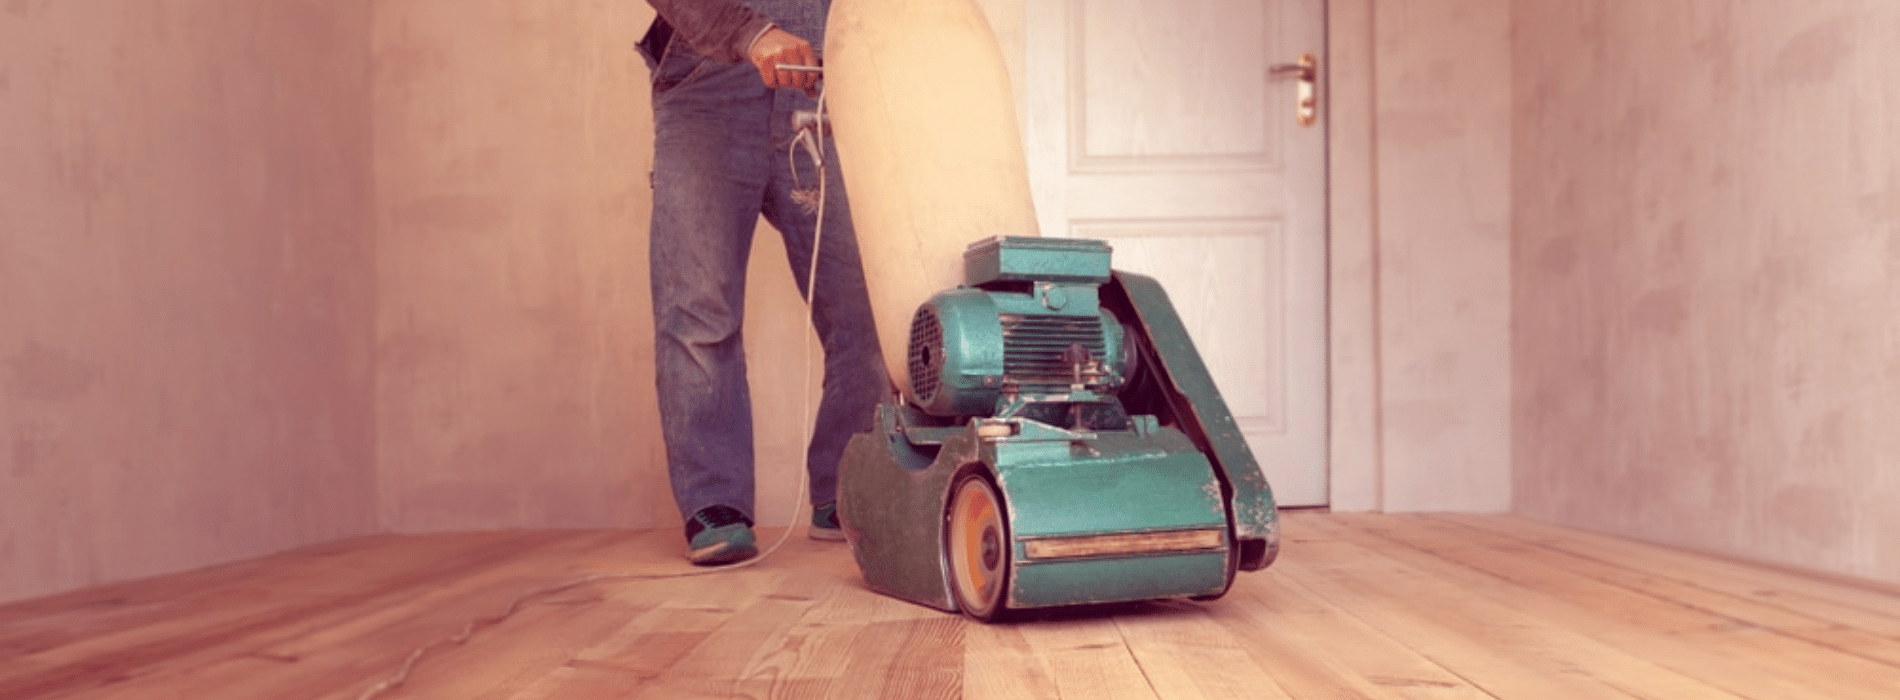 In Whitton, TW2, Mr Sander® are using a Bona Belt sander (2.2 kW, 230V) to sand a parquet floor. The sander is connected to a dust extraction system with a HEPA filter (50 Hz/60 Hz) for a clean and efficient result.